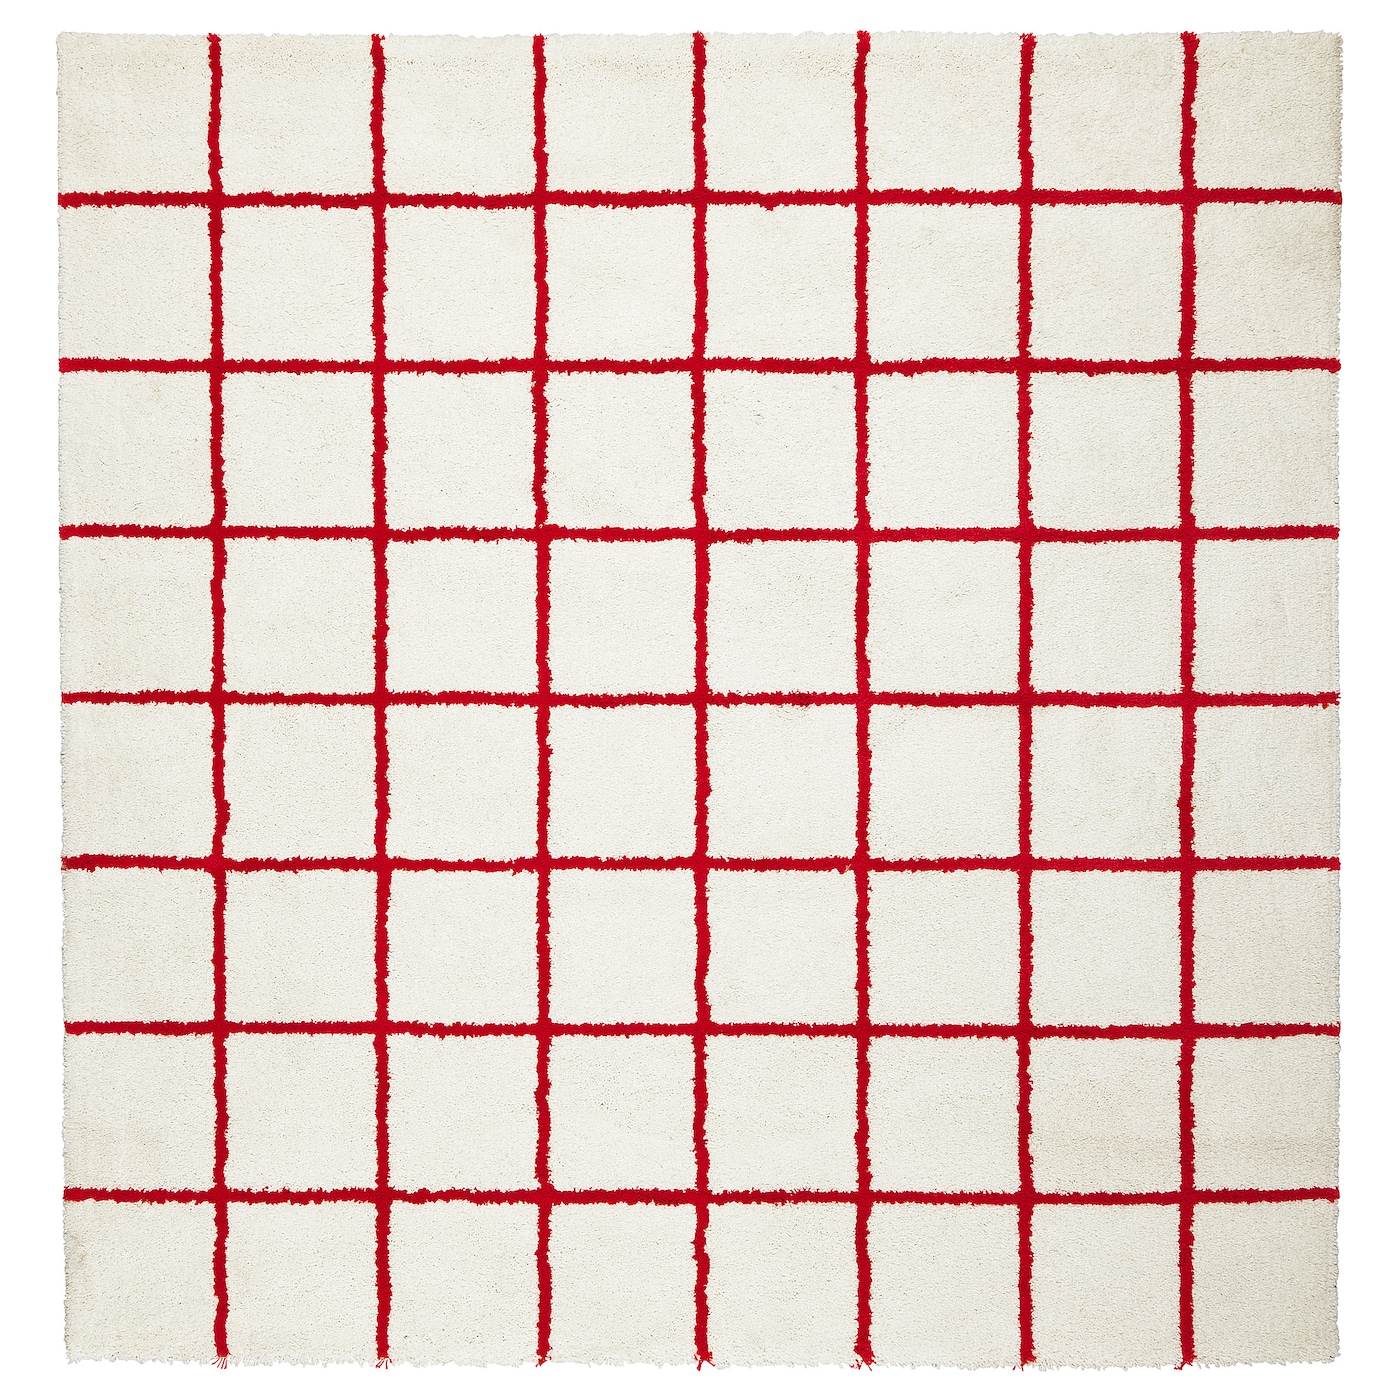 Red-and-white-grid-rug-79475